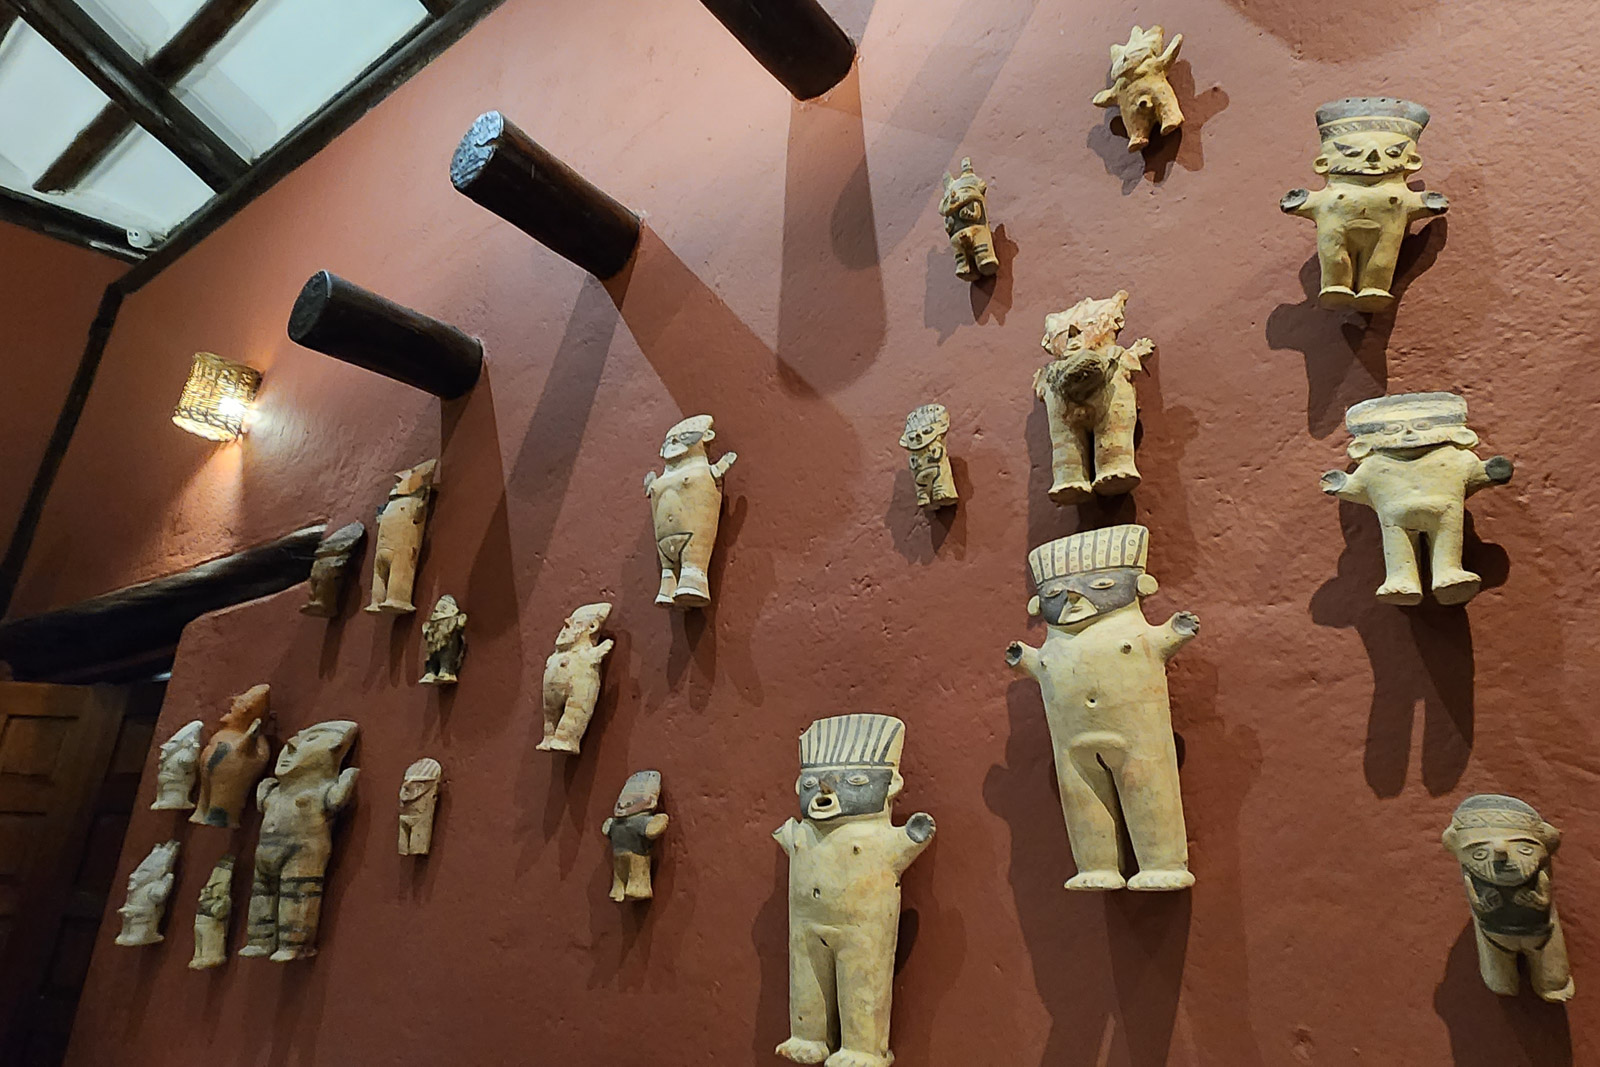 Terracotta figures from the Chancay culture decorate a wall at the Inkaterra Machu Picchu Pueblo Hotel.